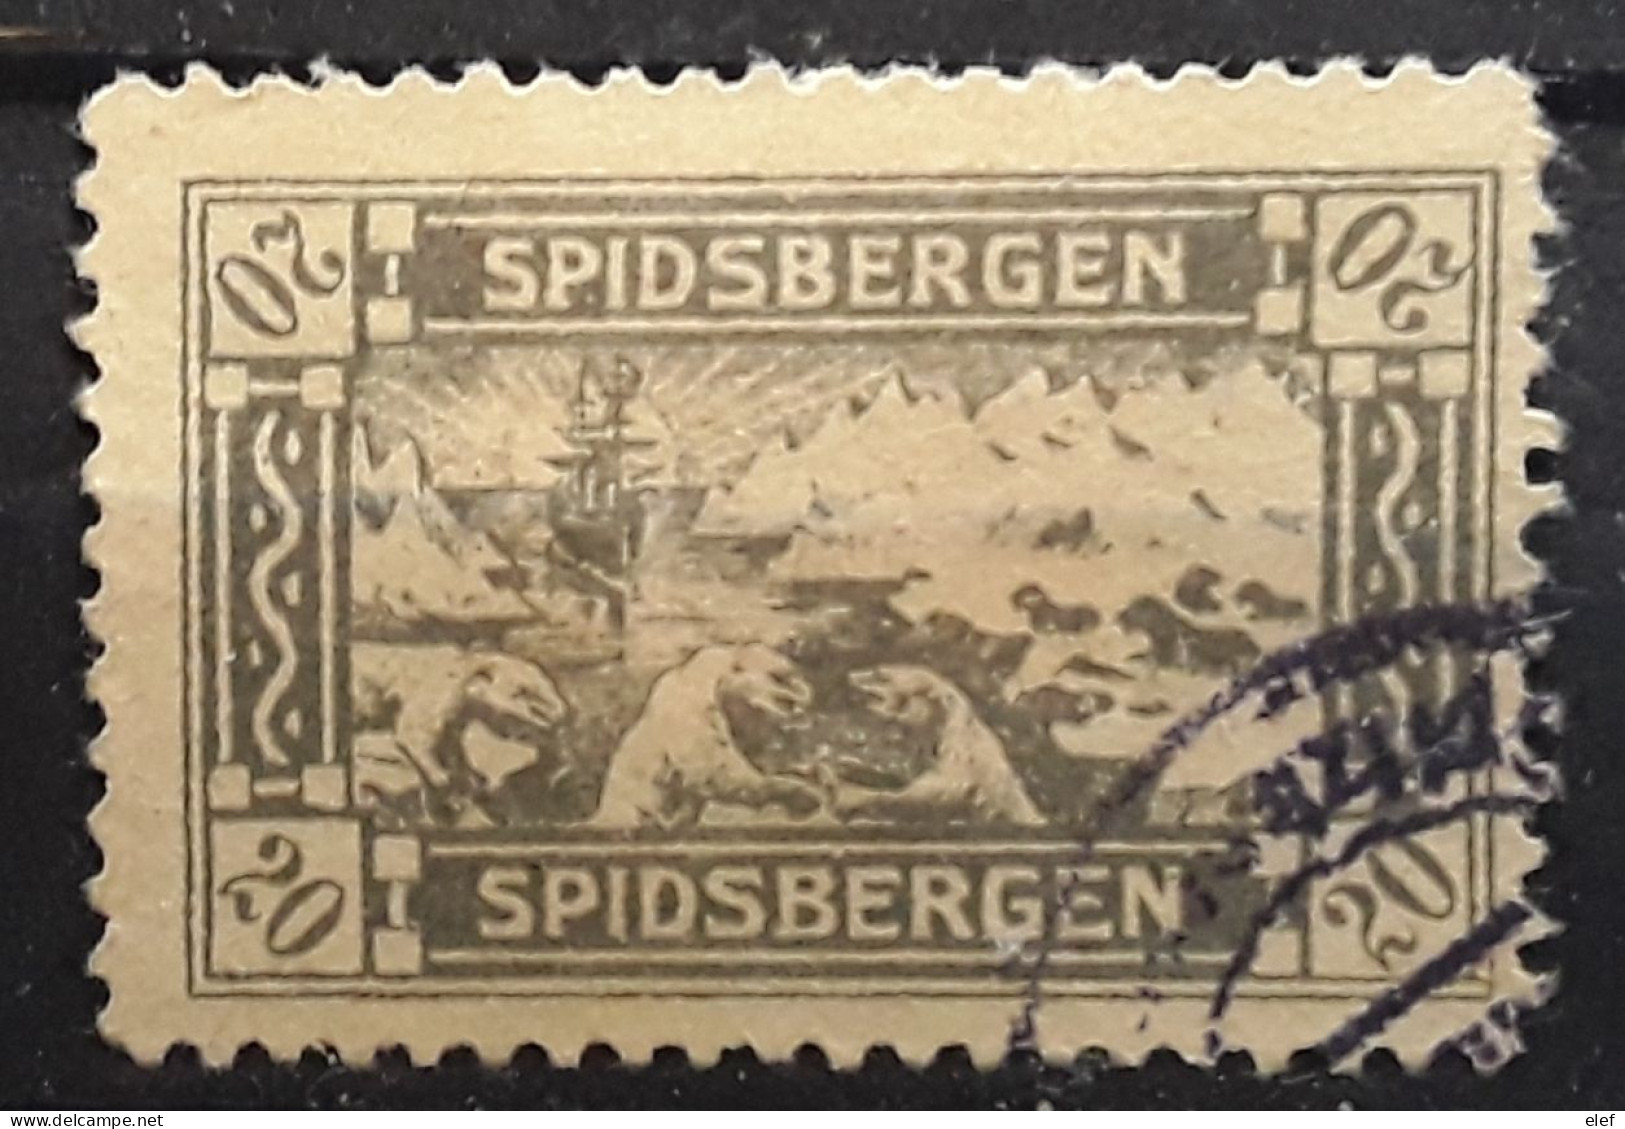 NORGE NORWAY NORVÈGE, !ocal Post  Spitzbergen Spidsbergen , 20 O Gris Polar Bear Ours Polaire Eisbar , Obl TB - Local Post Stamps